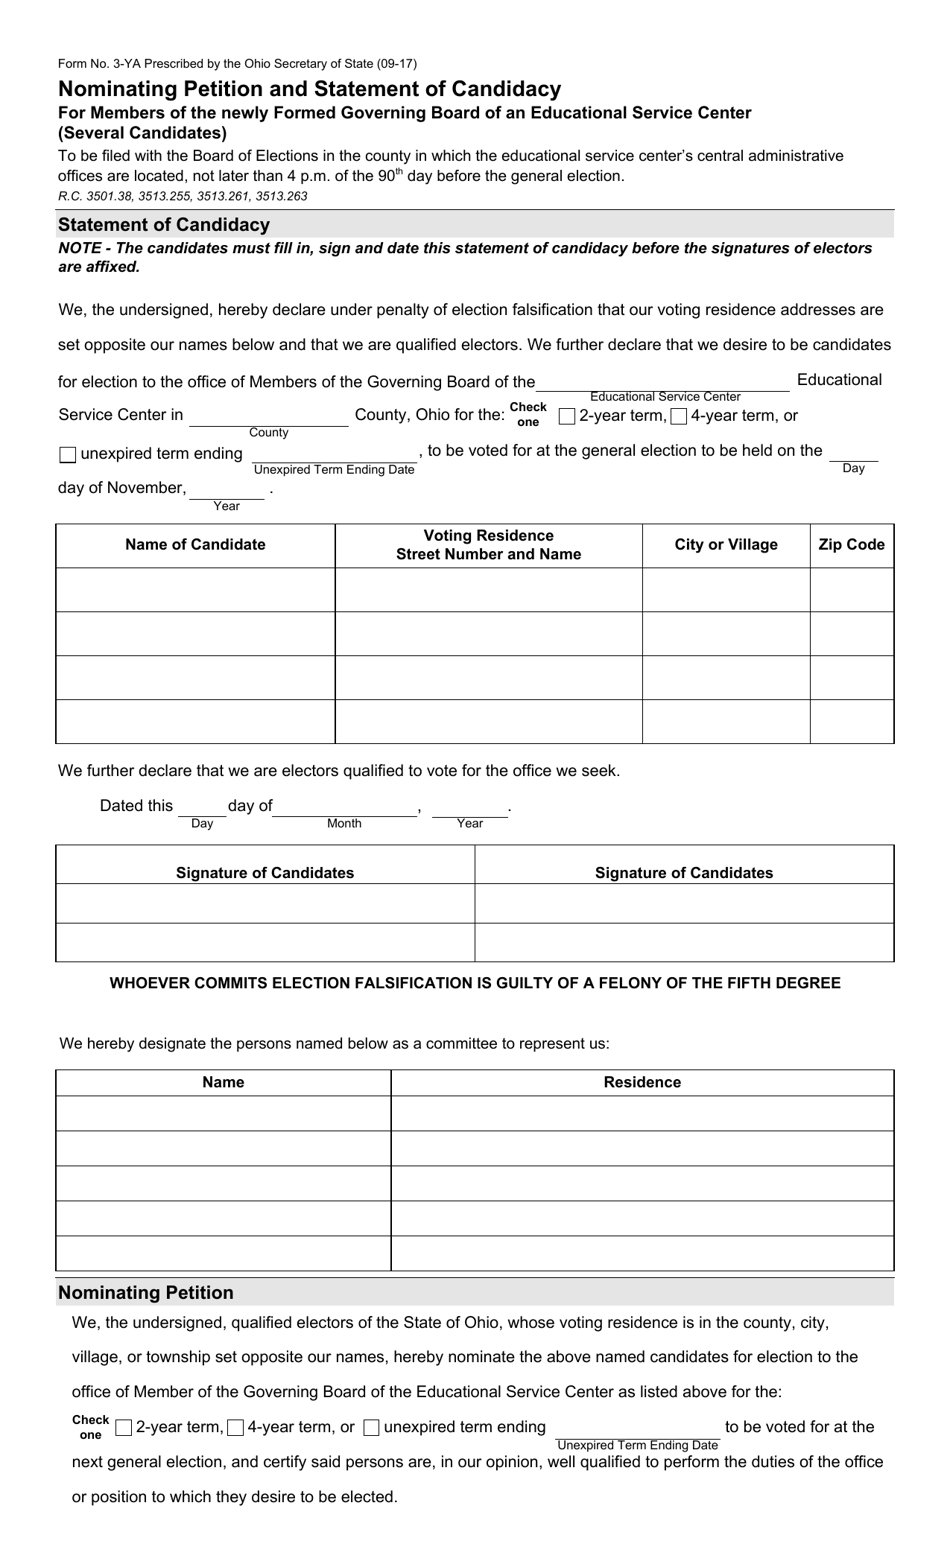 Form 3-YA Nominating Petition and Statement of Candidacy for Members of the Newly Formed Governing Board of an Educational Service Center (Several Candidates) - Ohio, Page 1